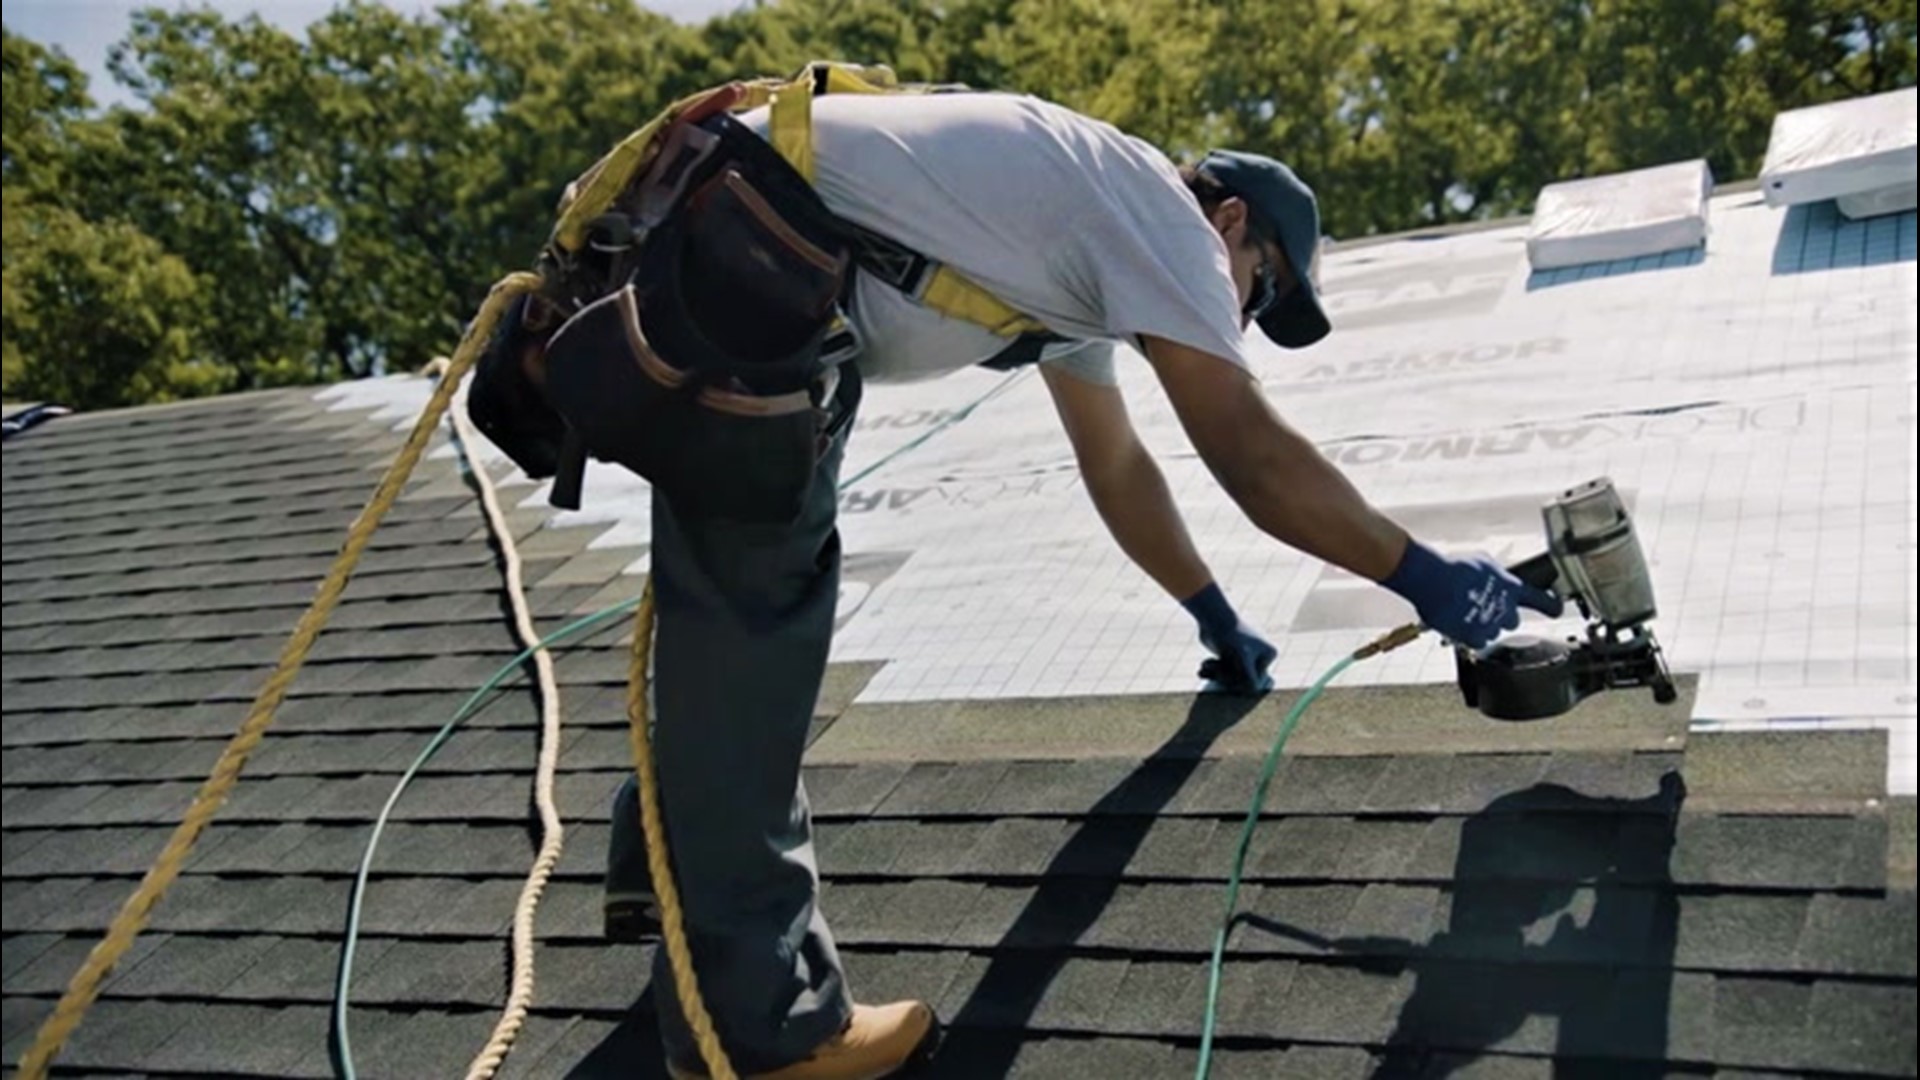 Weather can have an impact on people keeping a roof over their heads. Accuweather's Dexter Henry looks at why the upcoming season is perfect for roof repair.